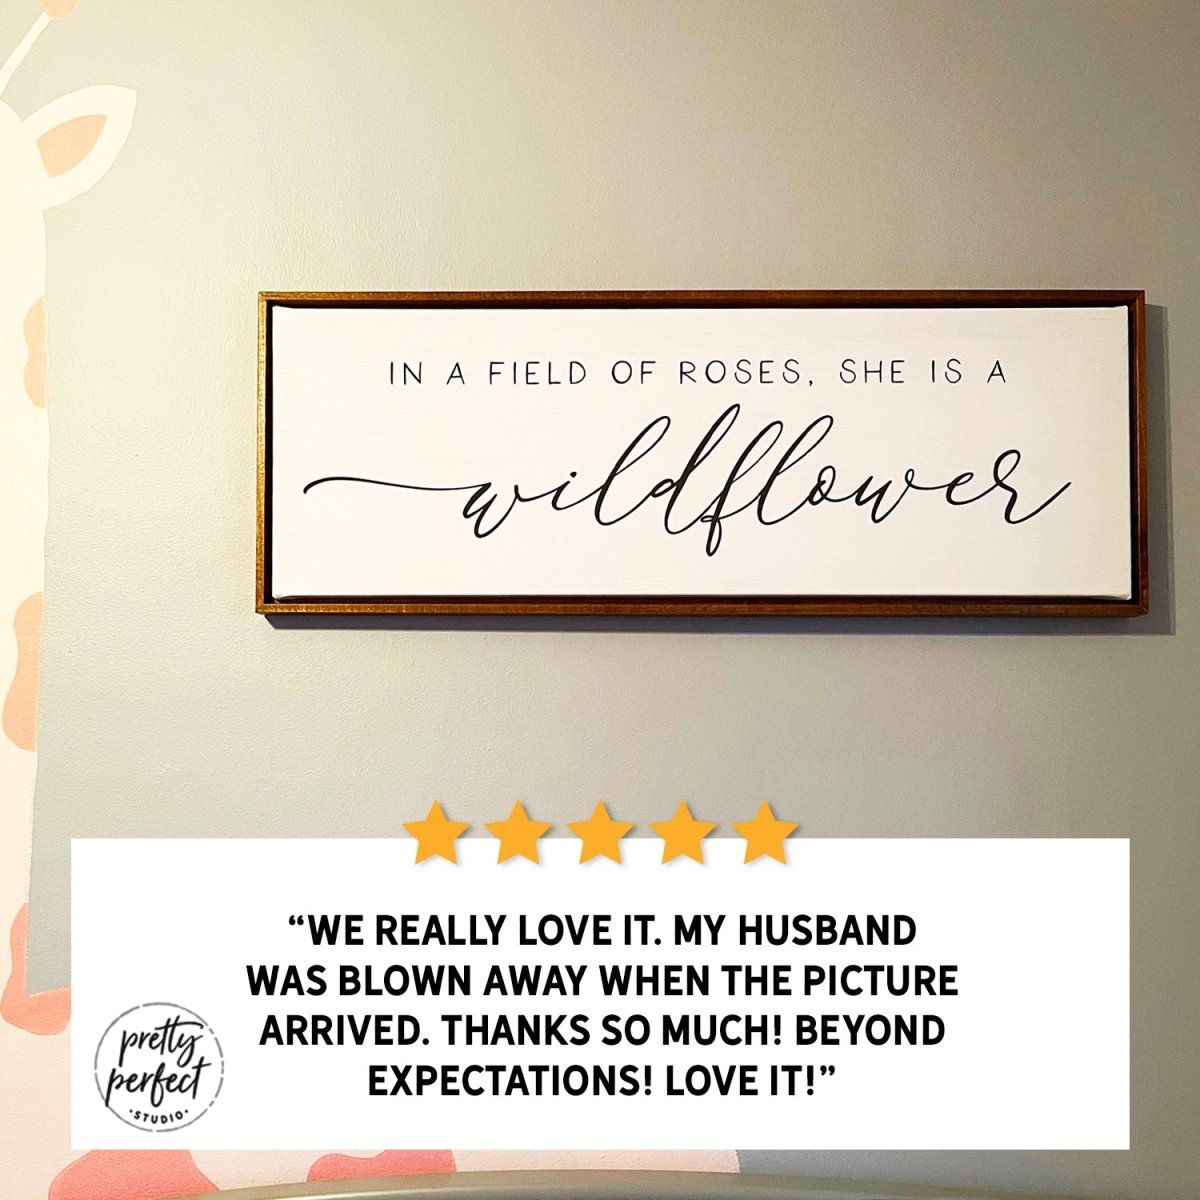 Customer product review for in a field of roses she is a wildflower sign by Pretty Perfect Studio